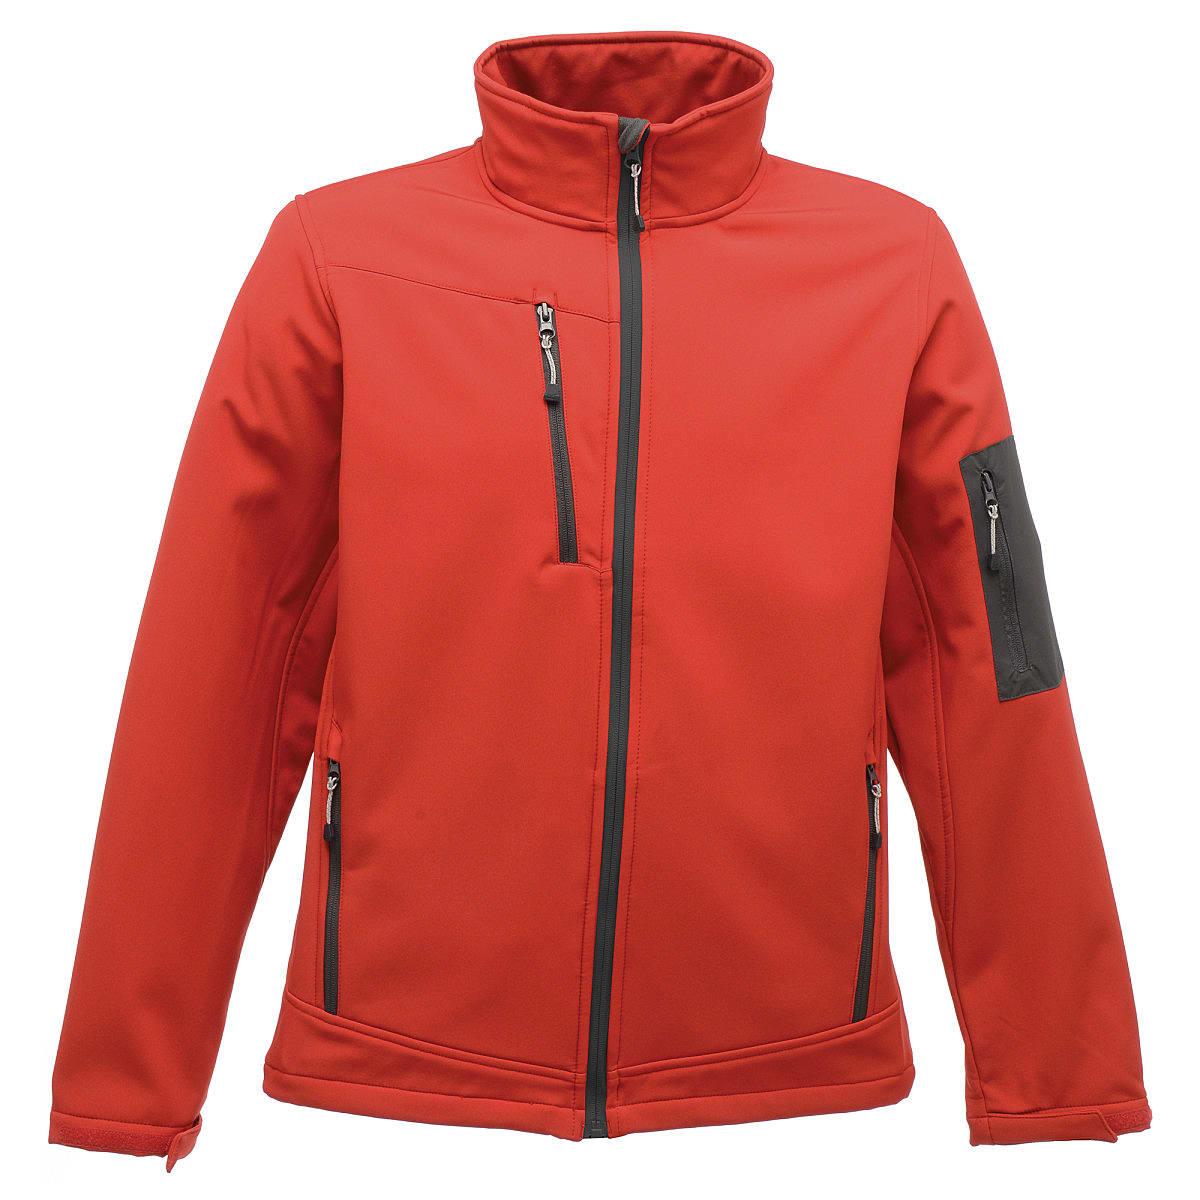 Regatta Arcola Softshell Jacket in Classic Red / Seal Grey (Product Code: TRA674)